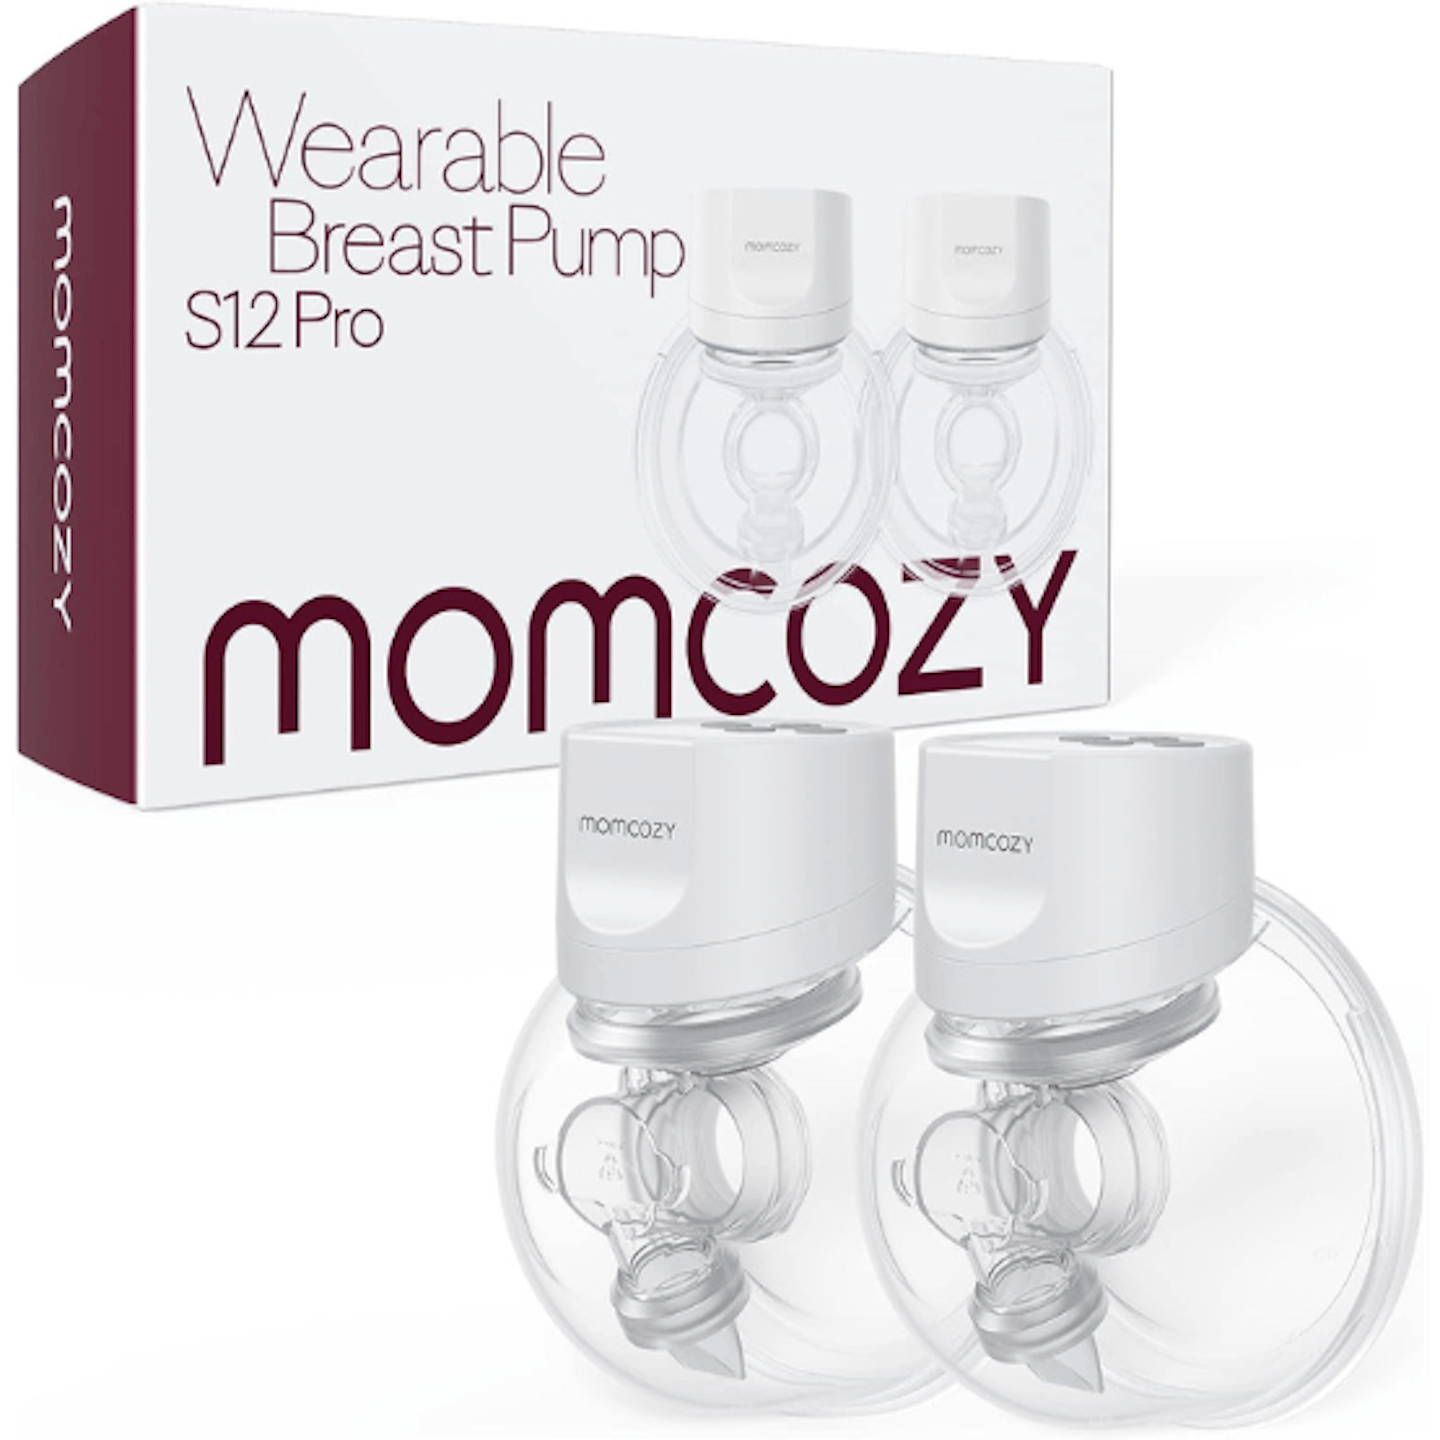 Momcozy Wearable Breast Pump S12, LCD Hands-Free Pump, 2 Mode & 9